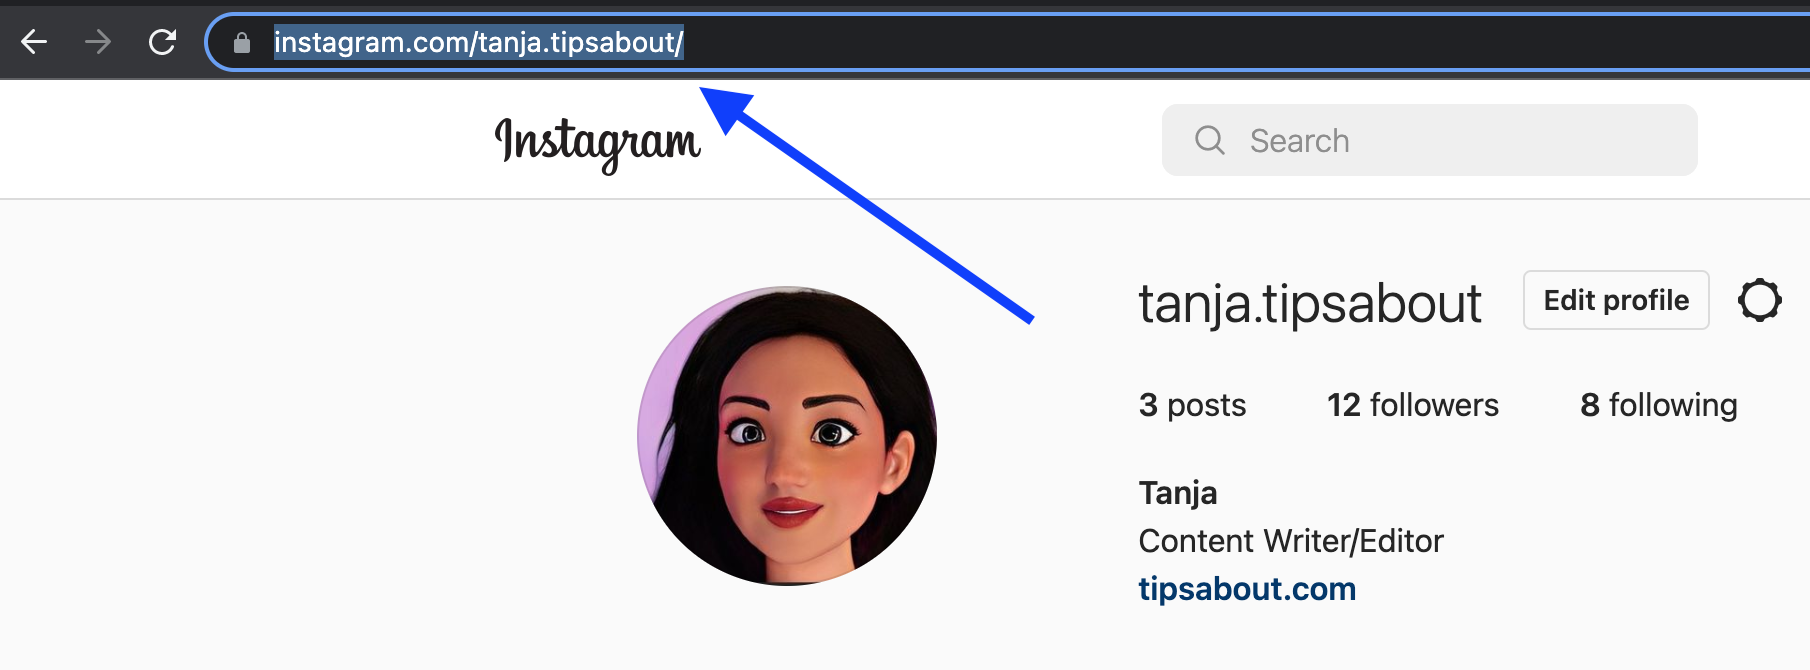 Tanja Tipsabout Instagram image